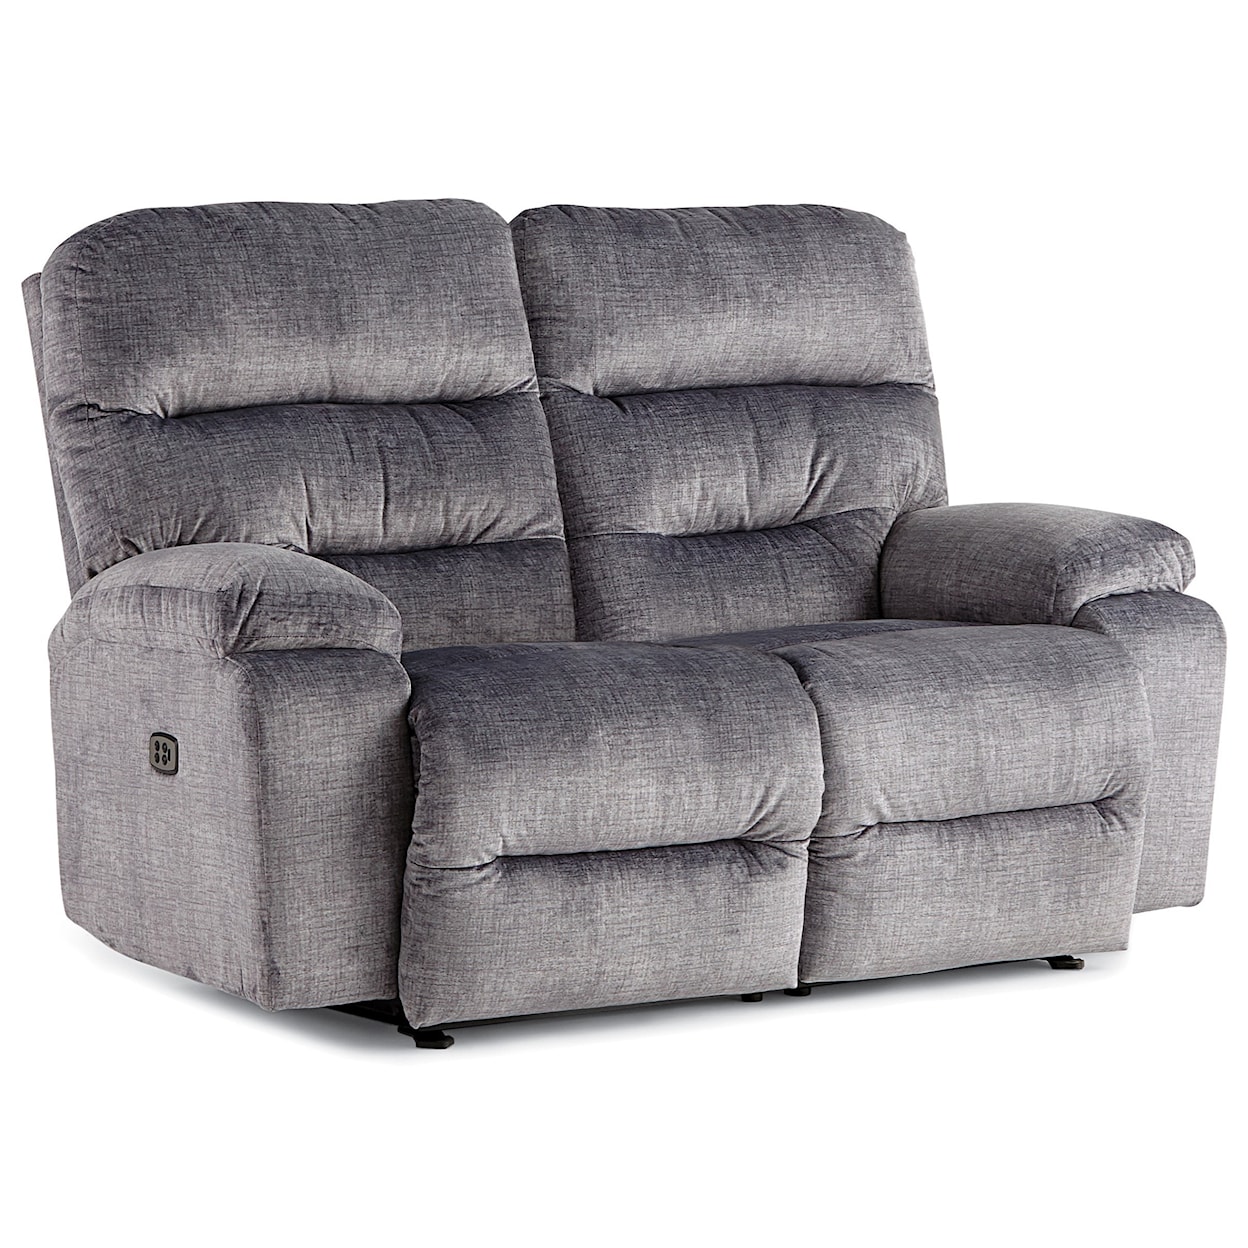 Best Home Furnishings Ryson Reclining Space Saver Loveseat